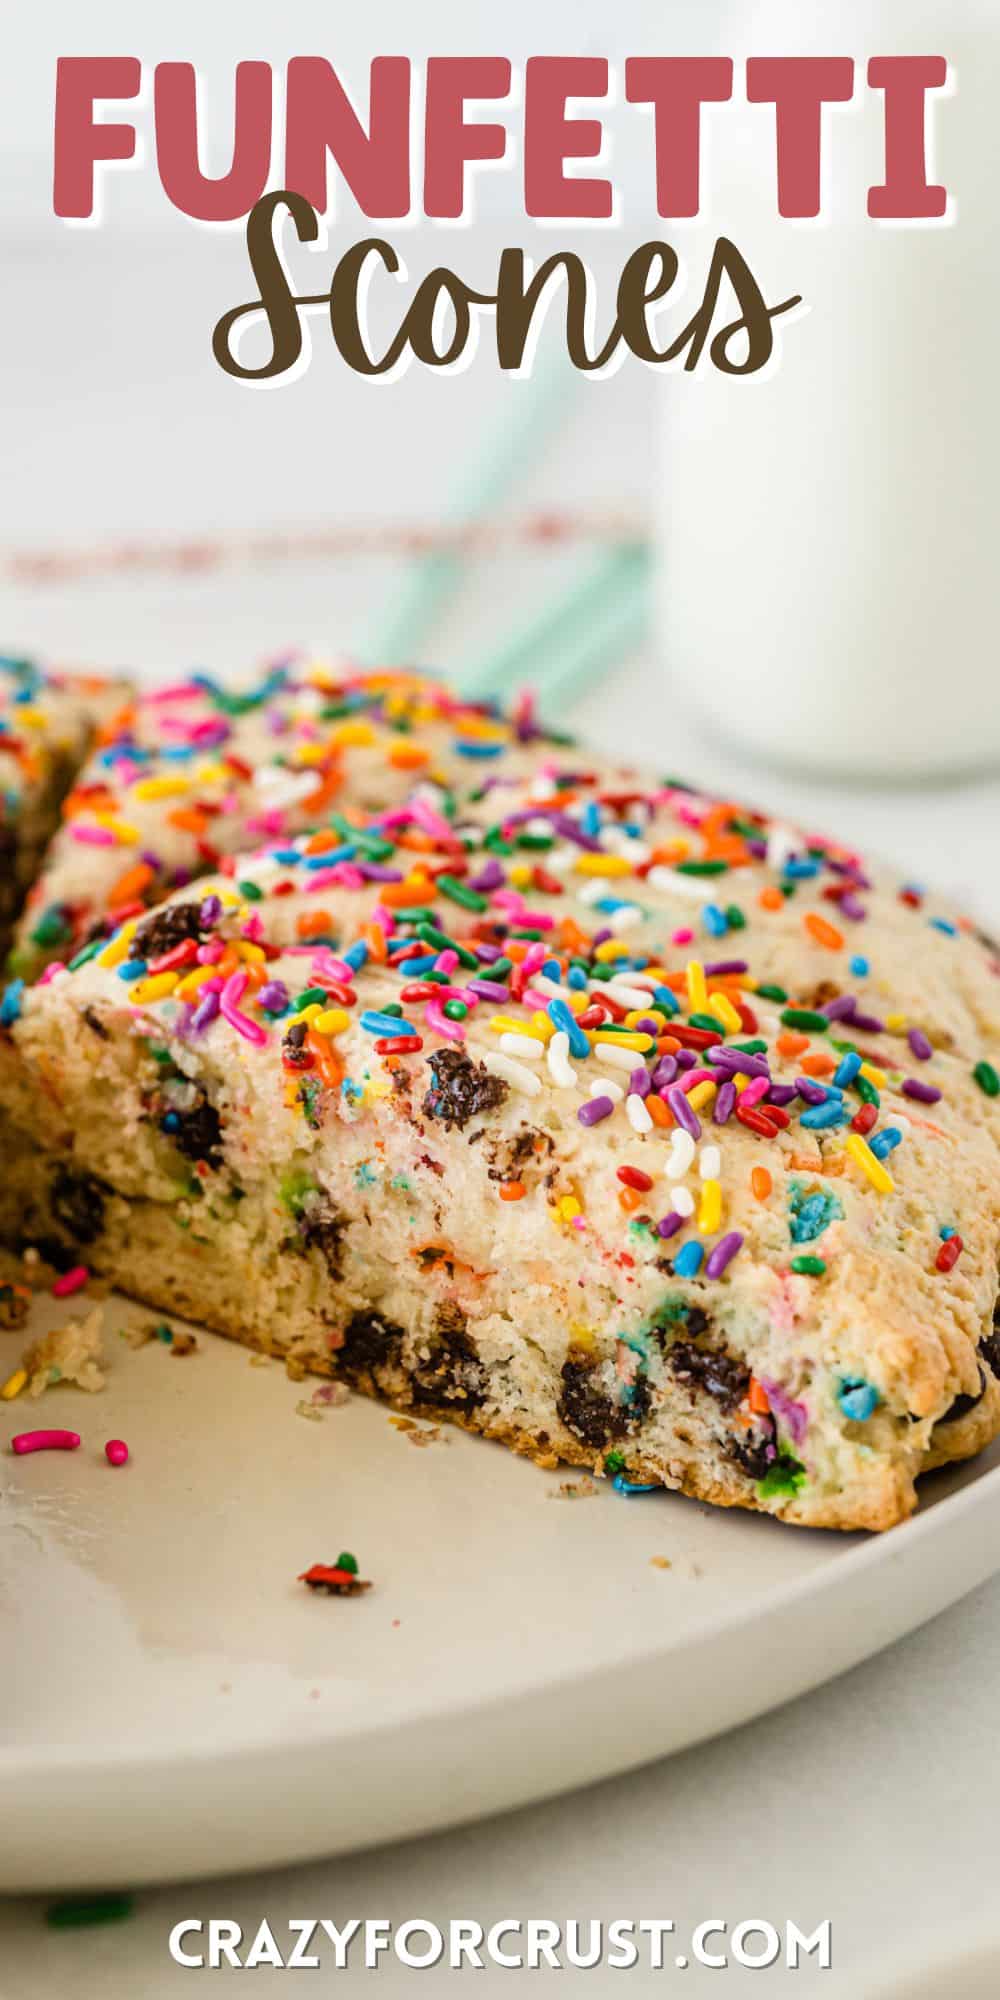 scones with sprinkles and chocolate baked in on a white plate with words on top